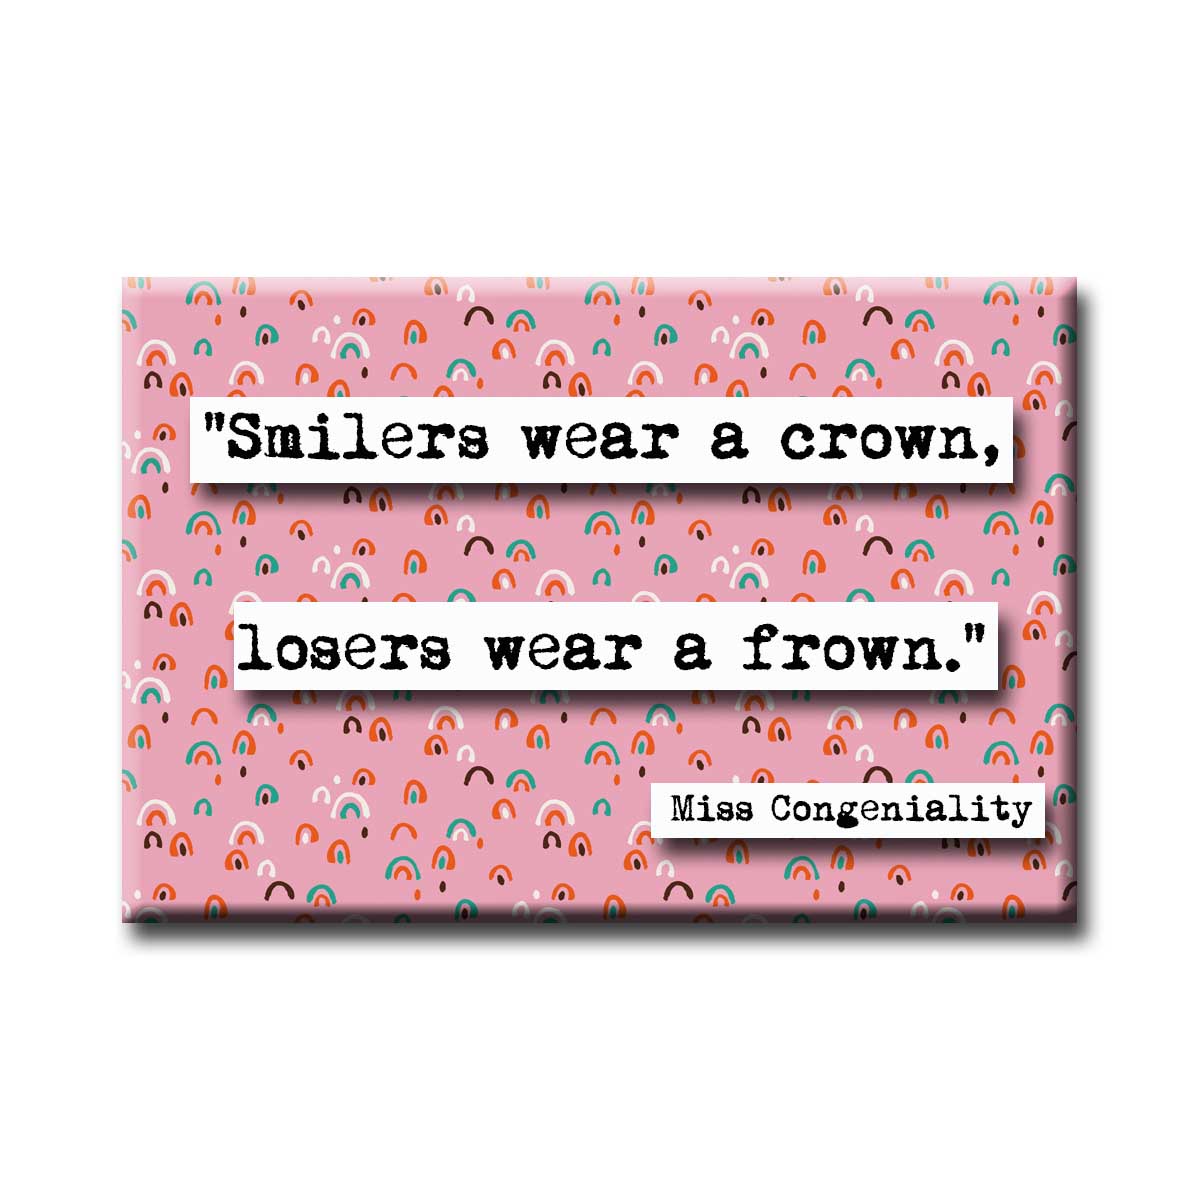 Miss Congeniality Smilers Wear a Crown Movie Quote Refrigerator Magnet